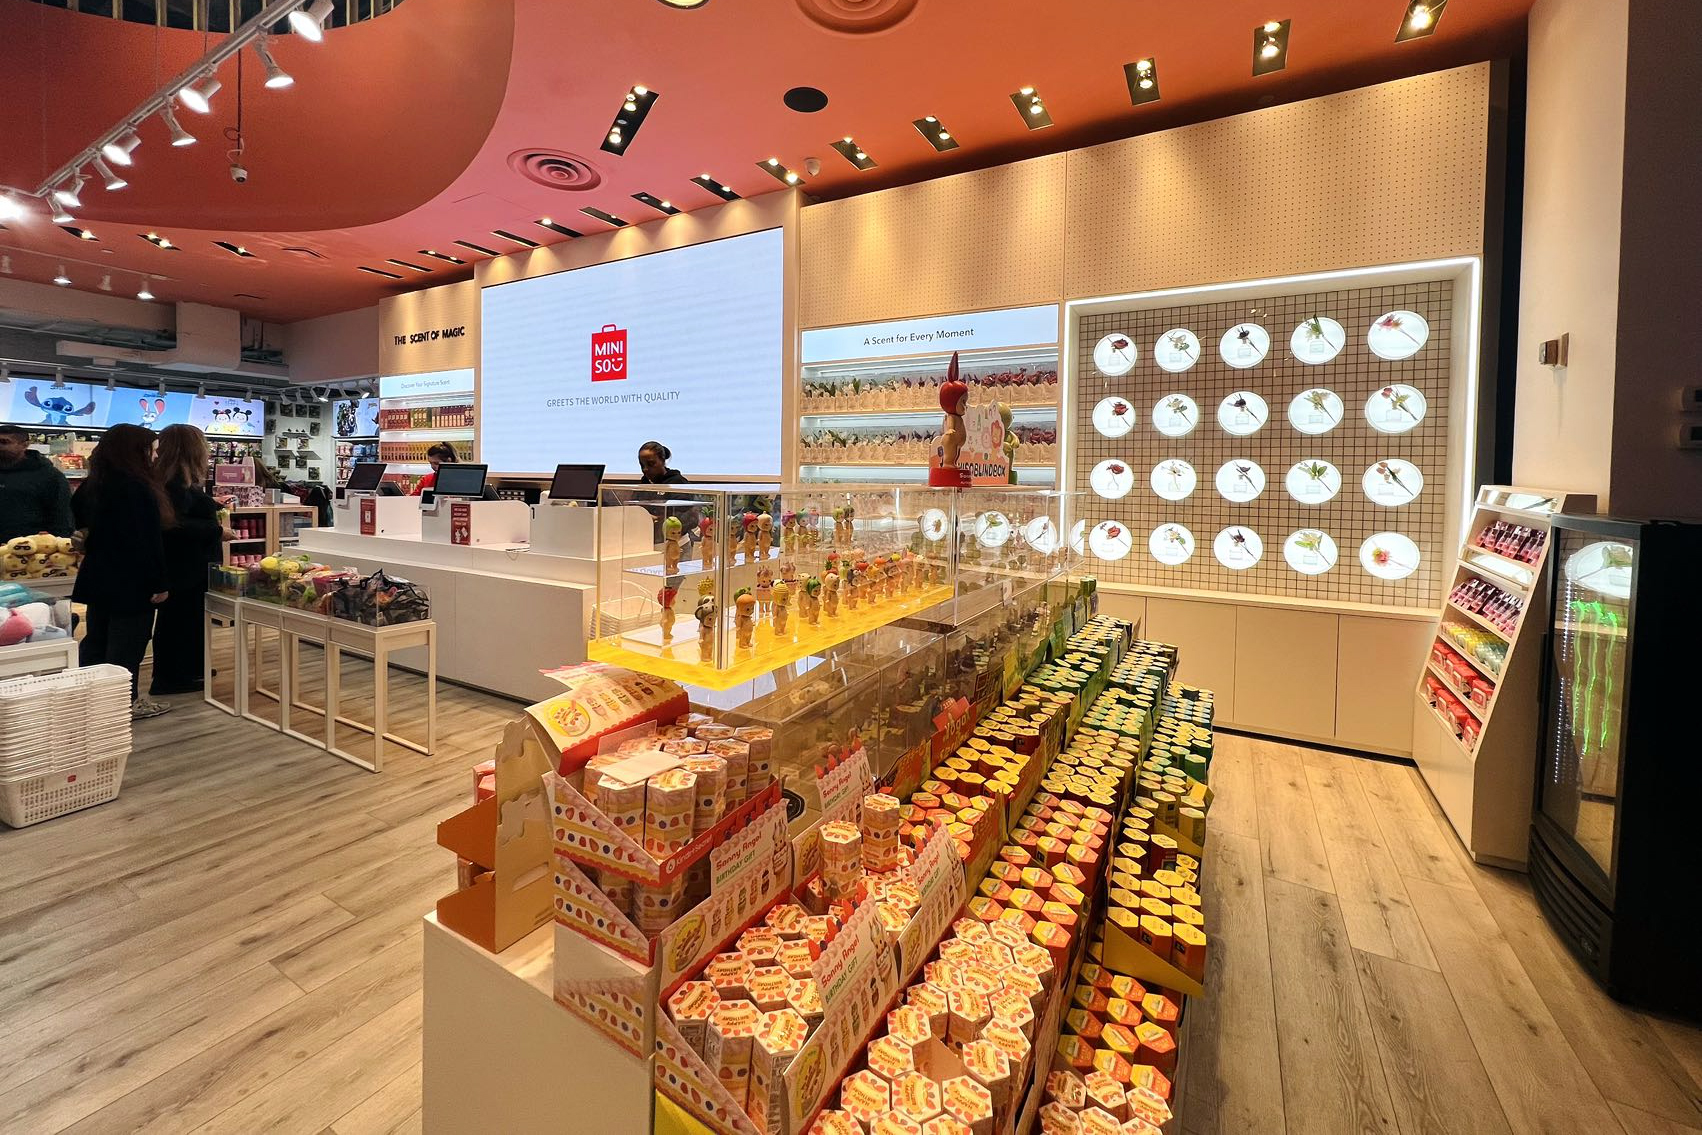 How Fast-Growing Chinese Retailer MINISO Is Building A Global Empire